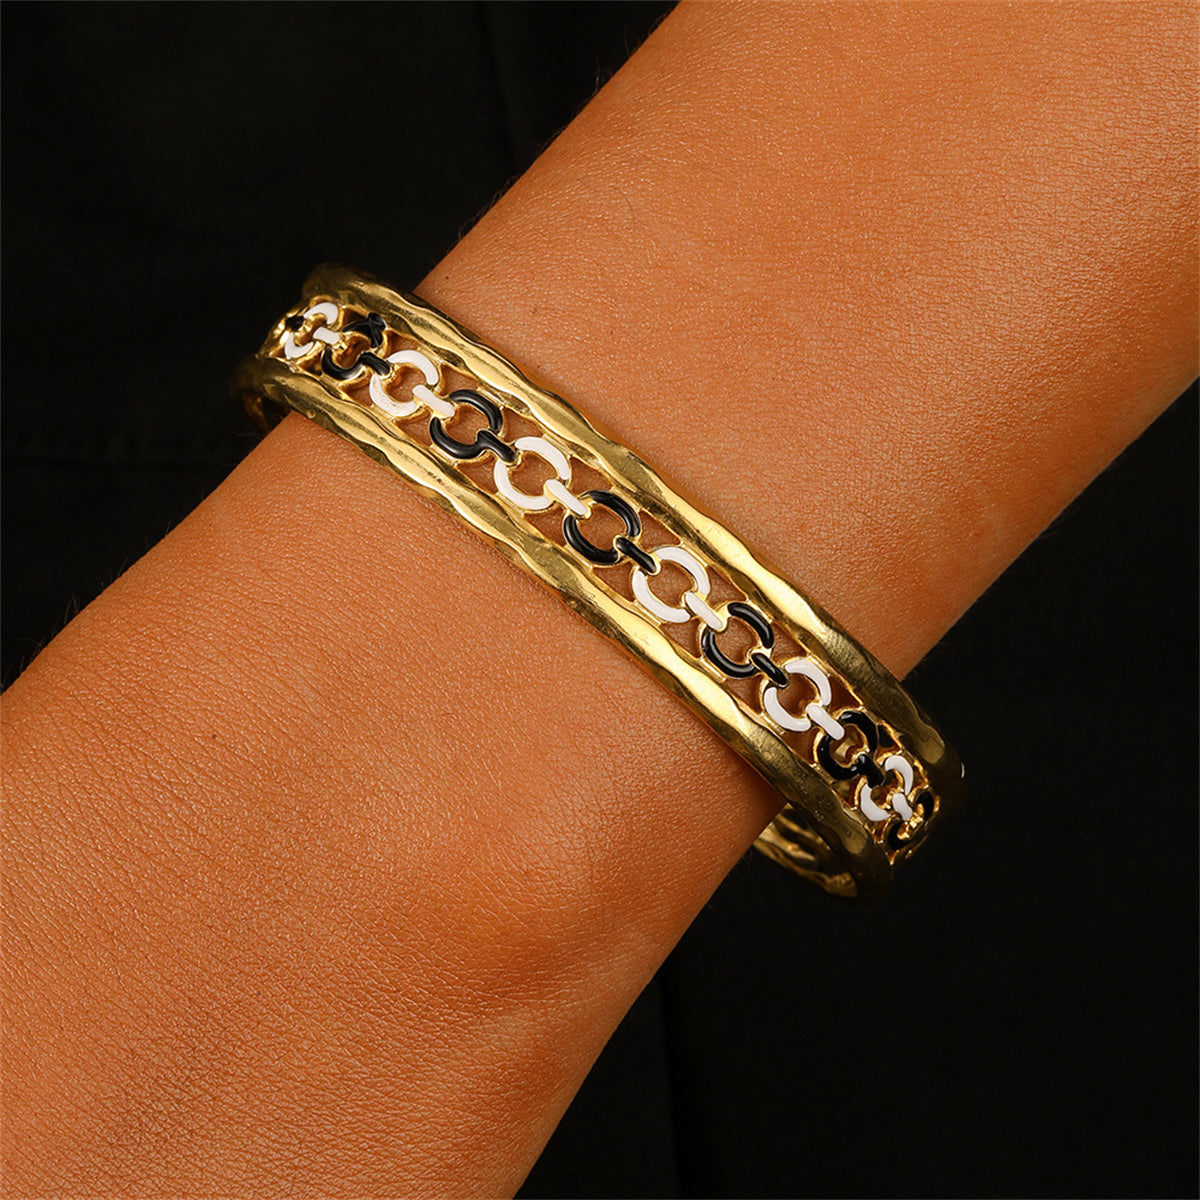 Black Enamel & 18K Gold-Plated Cable Cuff